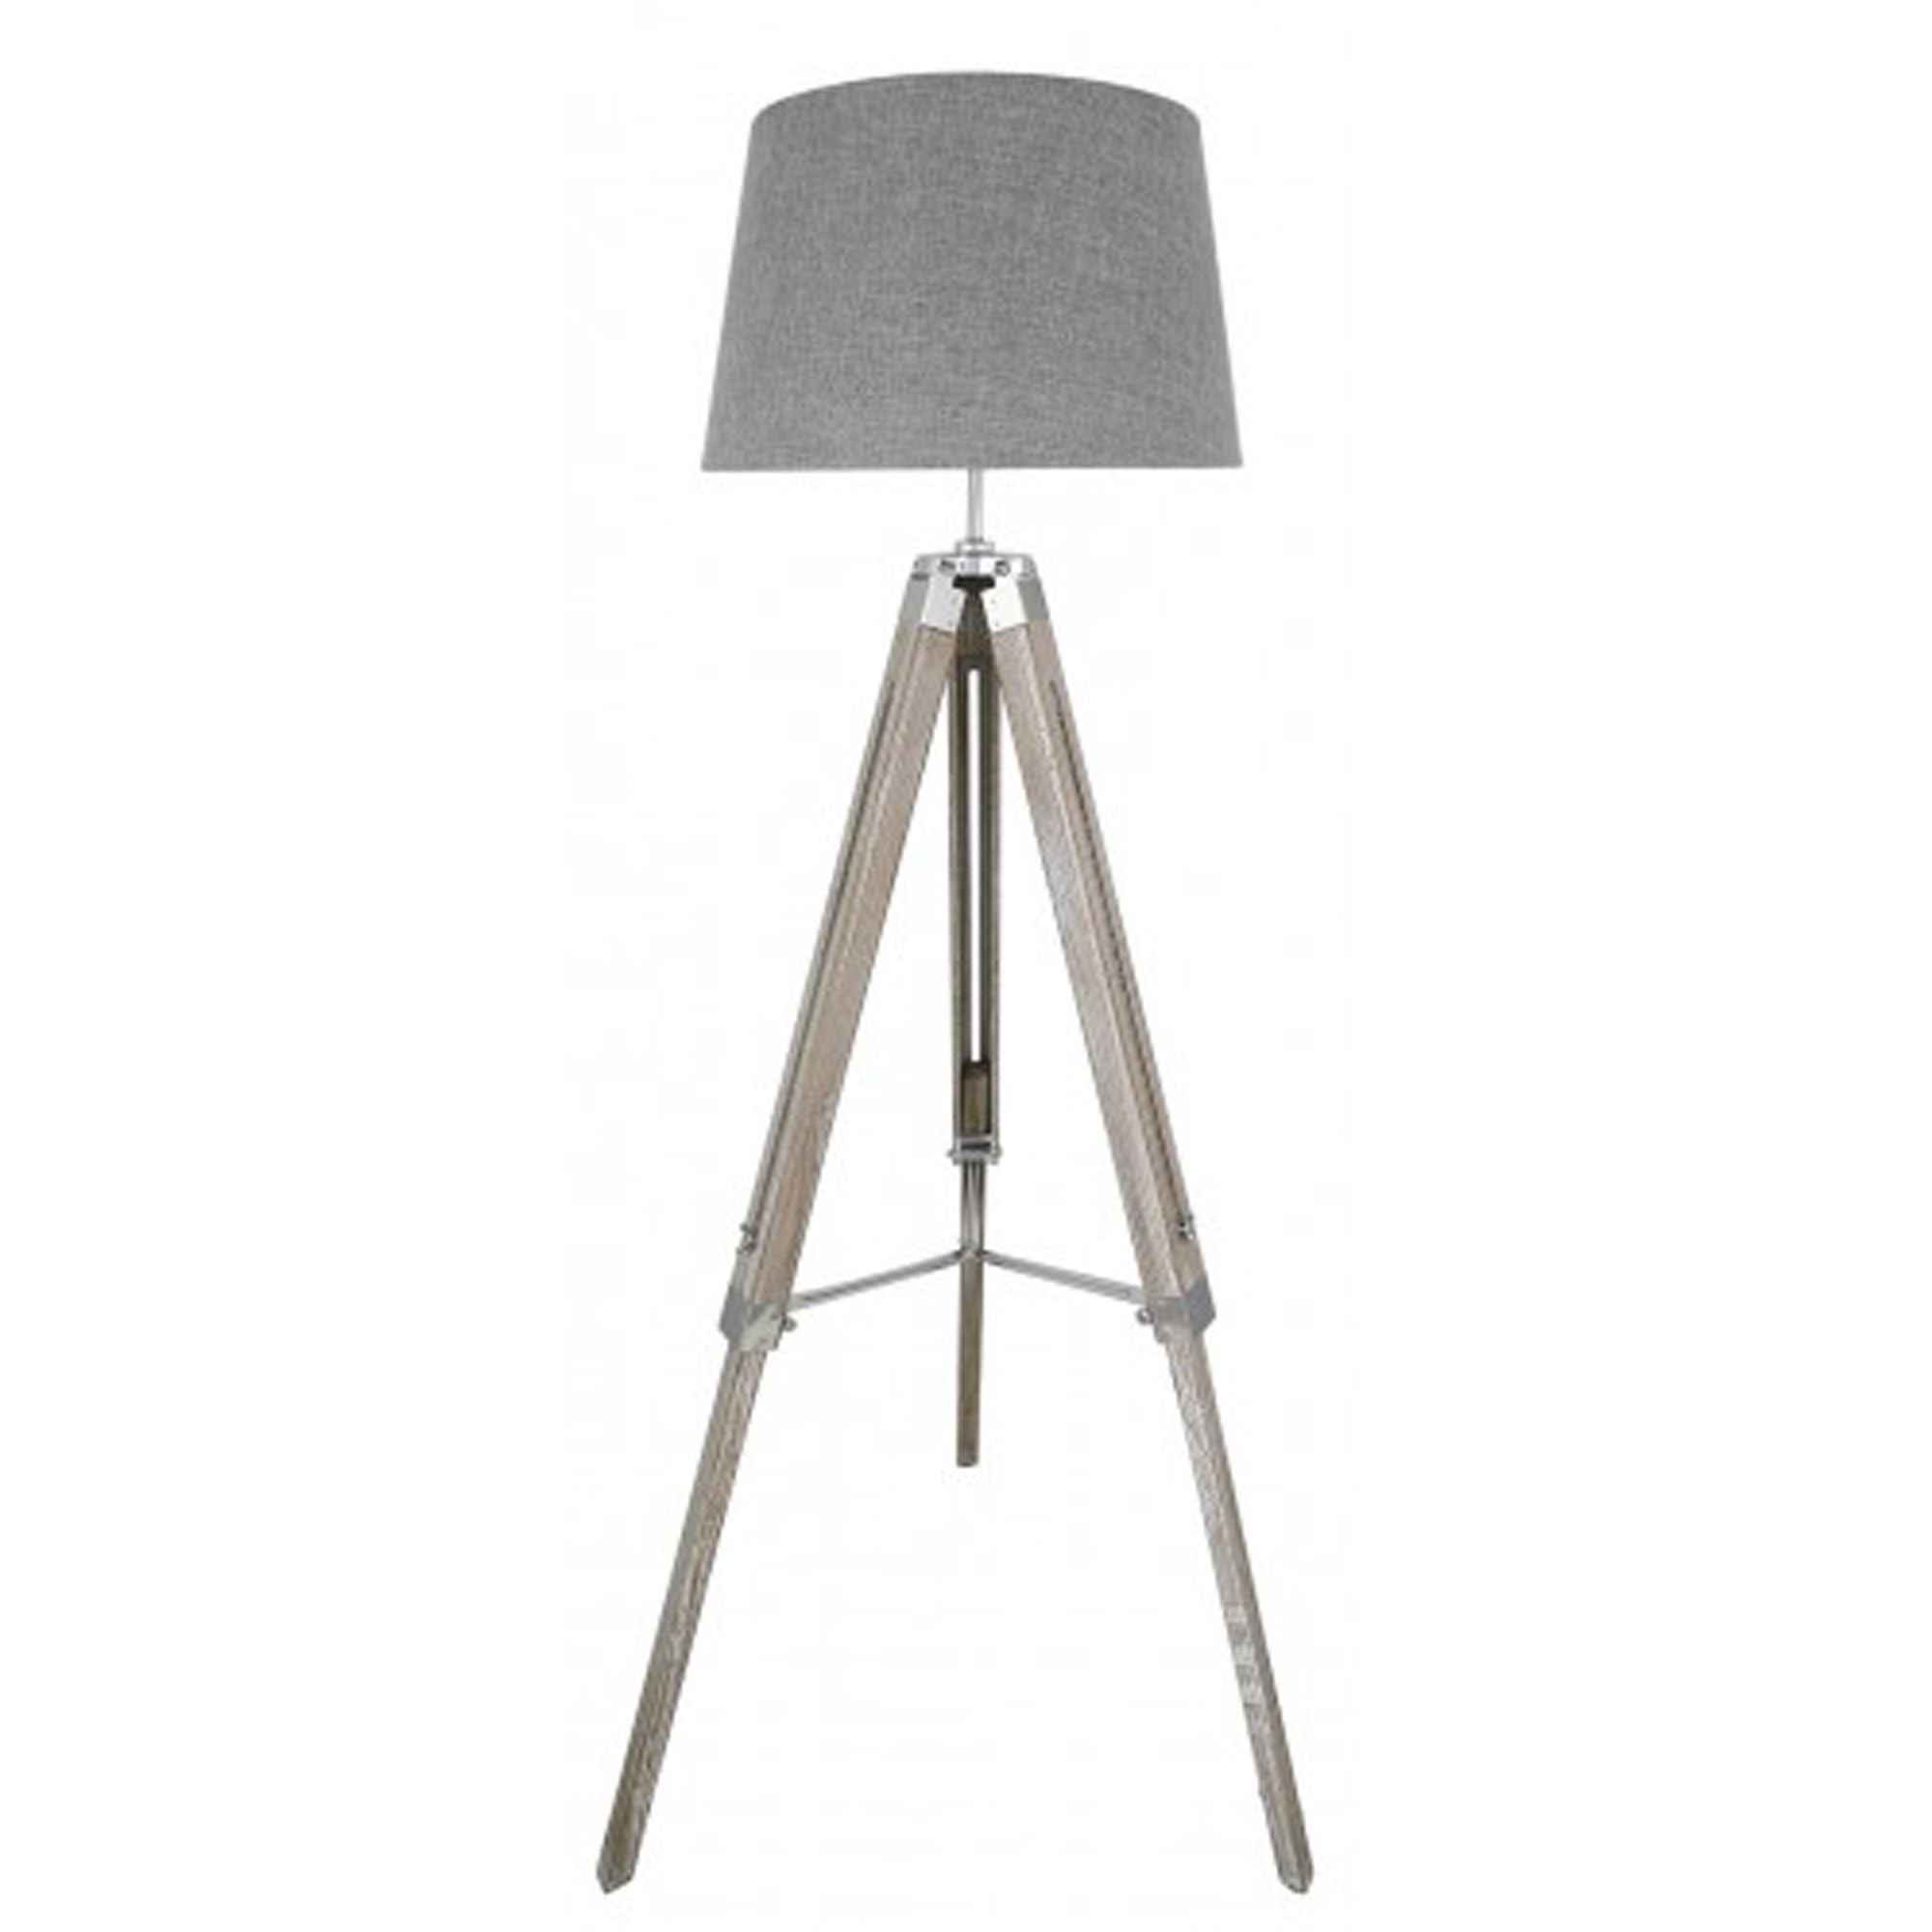 Floor Standing Lamps Throughout Well Known Grey Shade Standing Lamps (View 7 of 10)